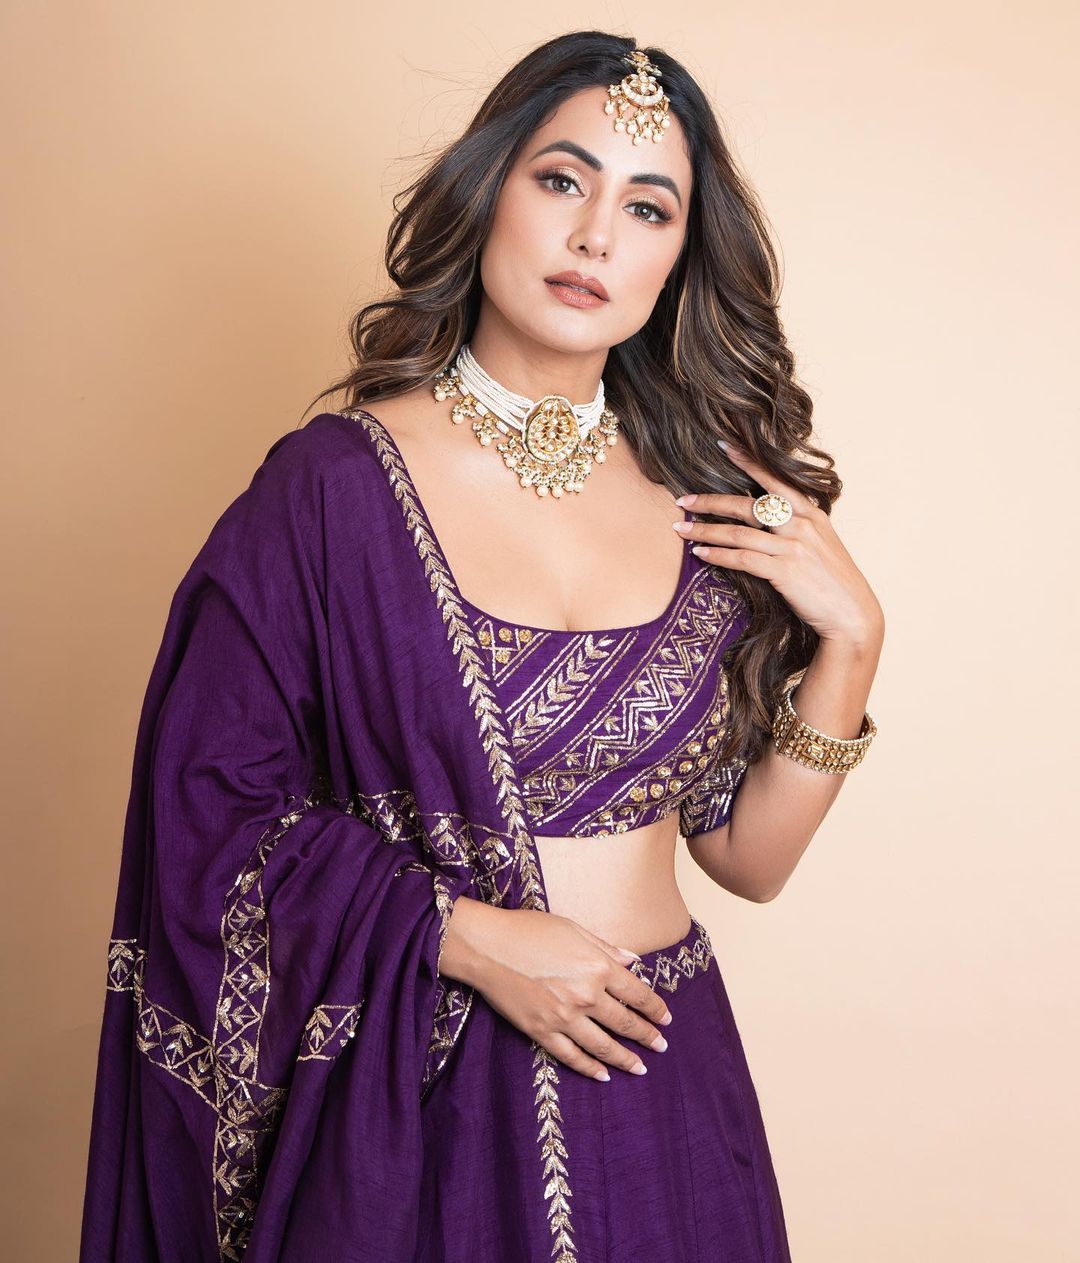 Hina Khan, in Rs 96,800 Lehenga, Looks Magically Real And That Shade of  Purple is oh-so-stunning